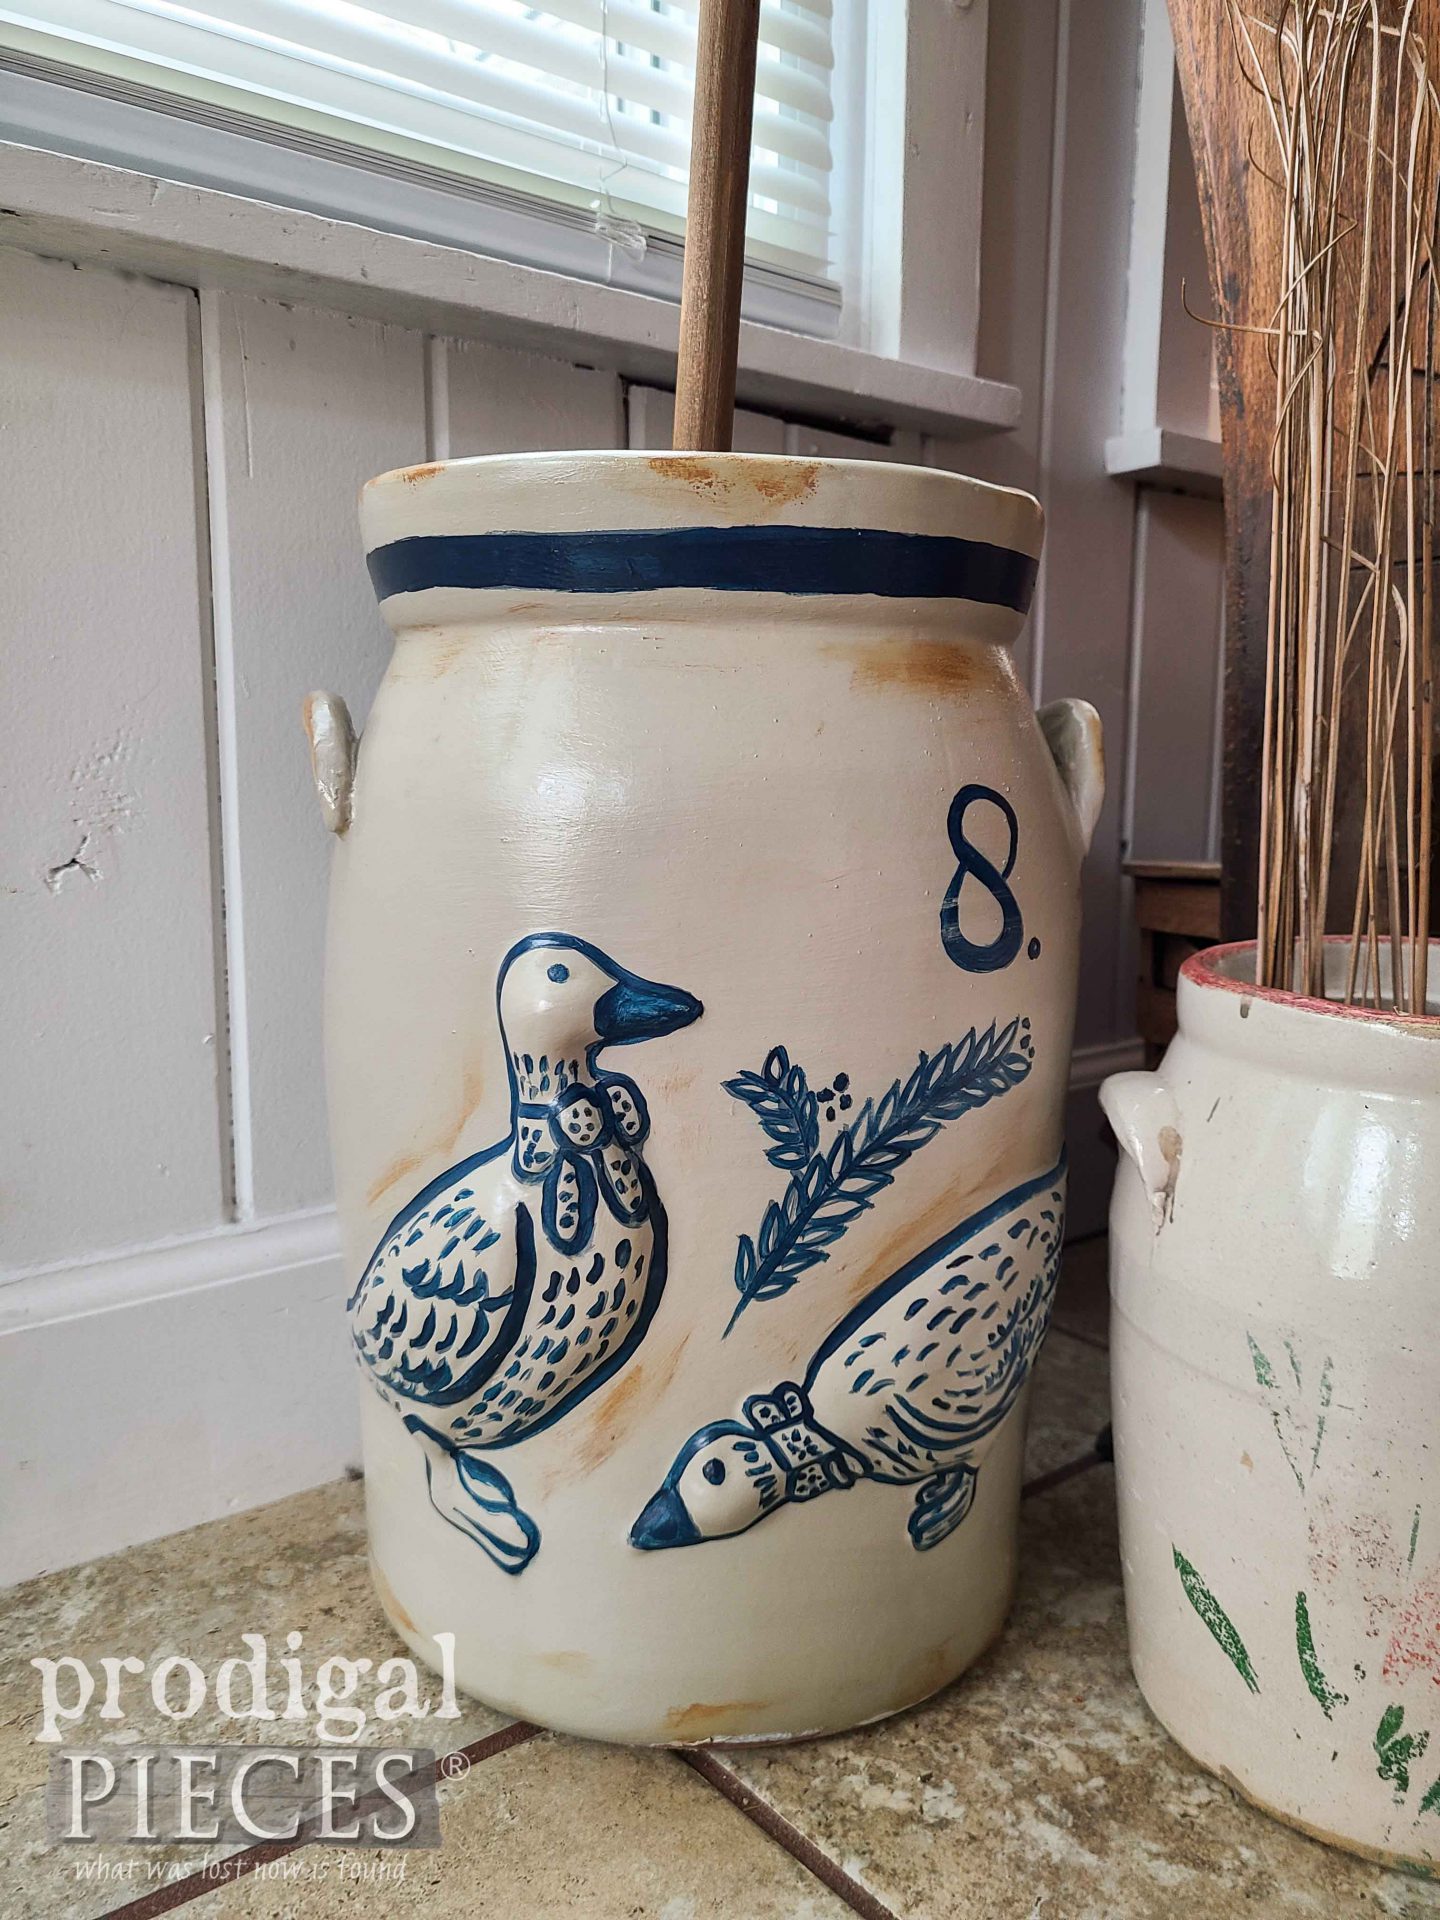 Painted Geese Butter Churn by Larissa of Prodigal Pieces | prodigalpieces.com #prodigalpieces #diy #crafts #farmhouse